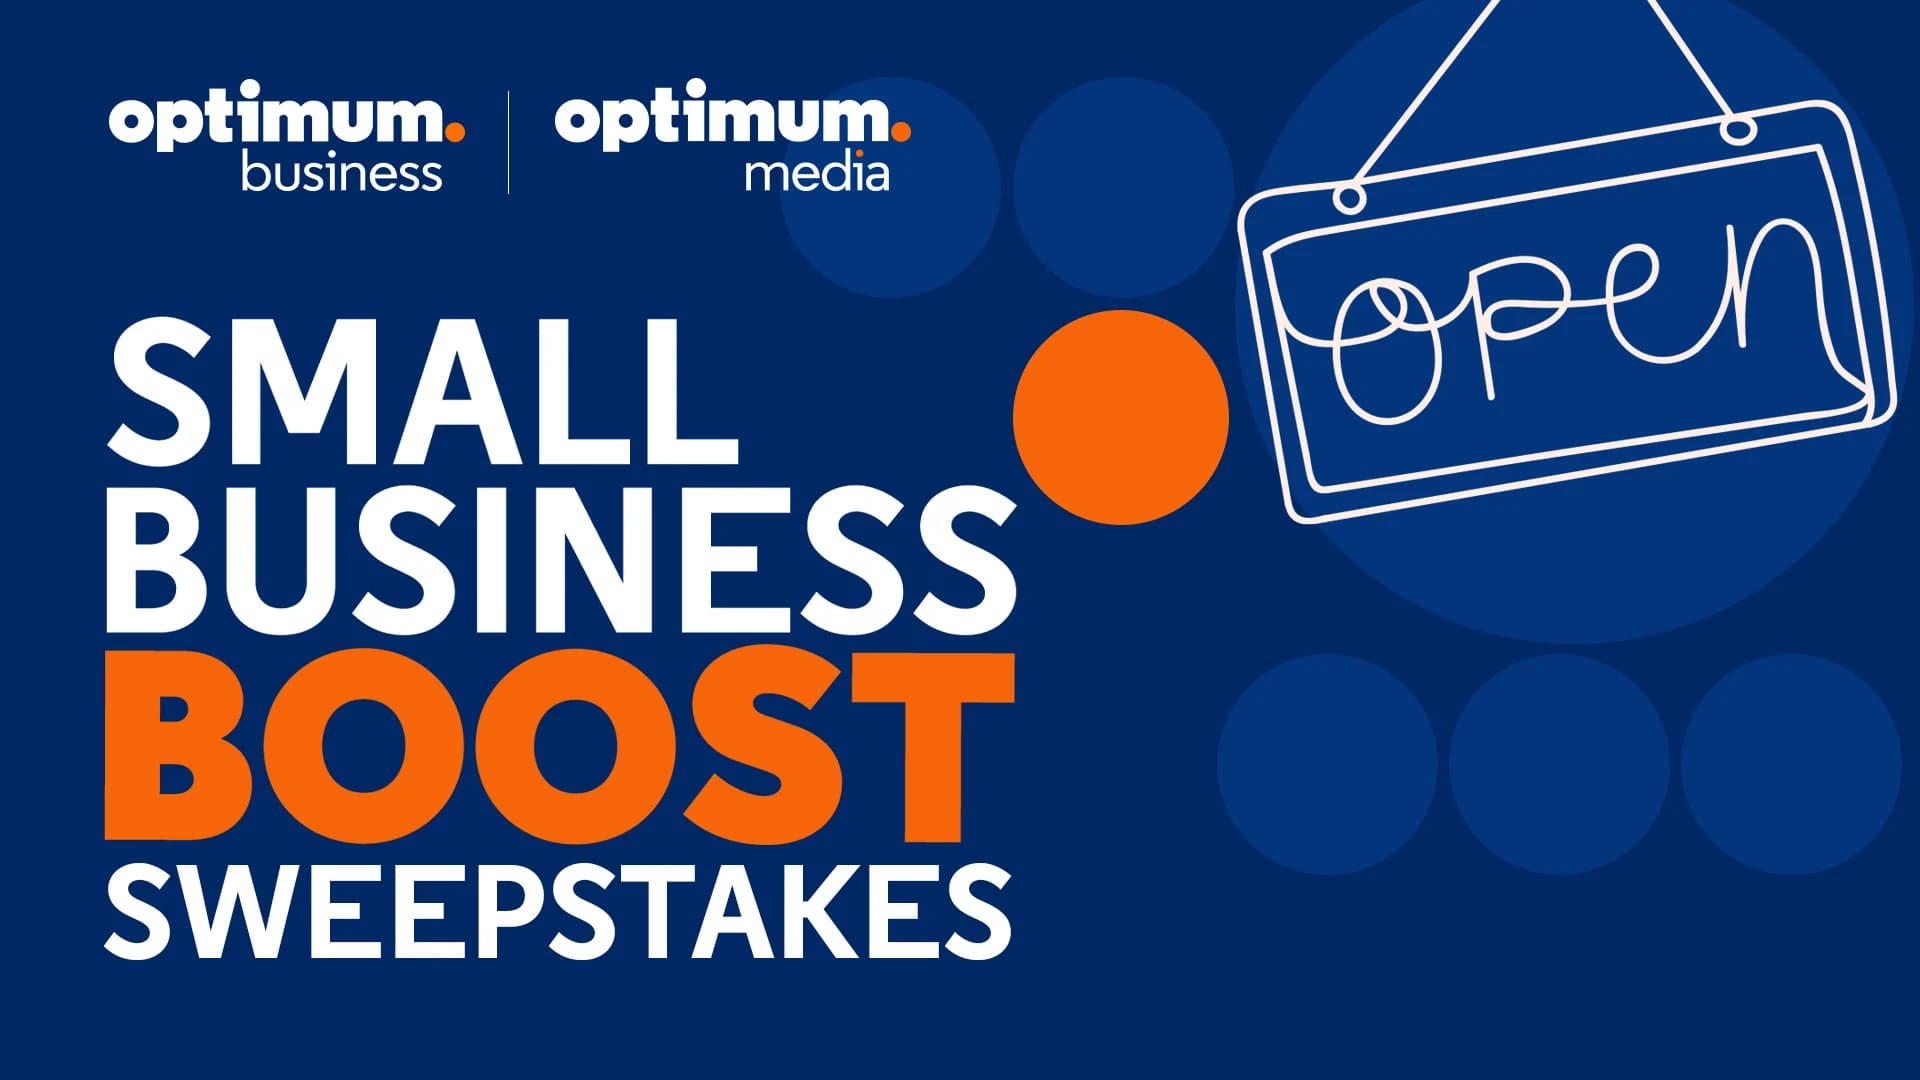 Optimum Small Business Boost Sweepstakes